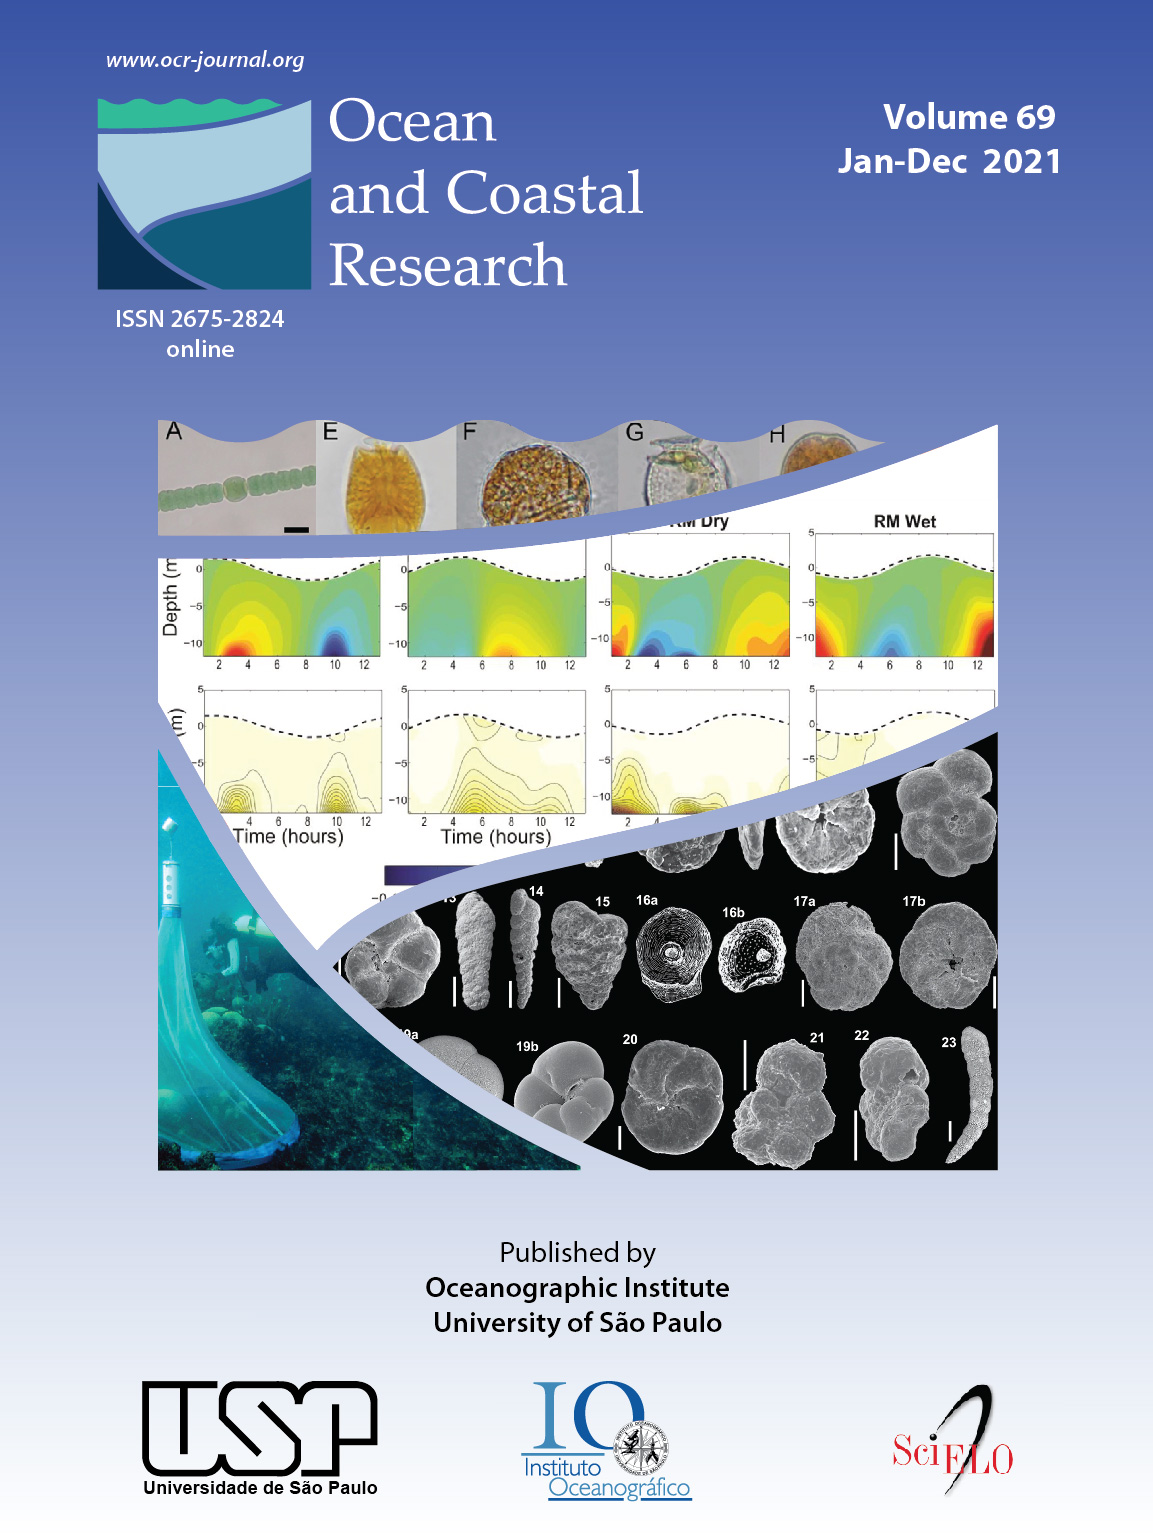 Ocean and Coastal Research 2021 -  Volume 69